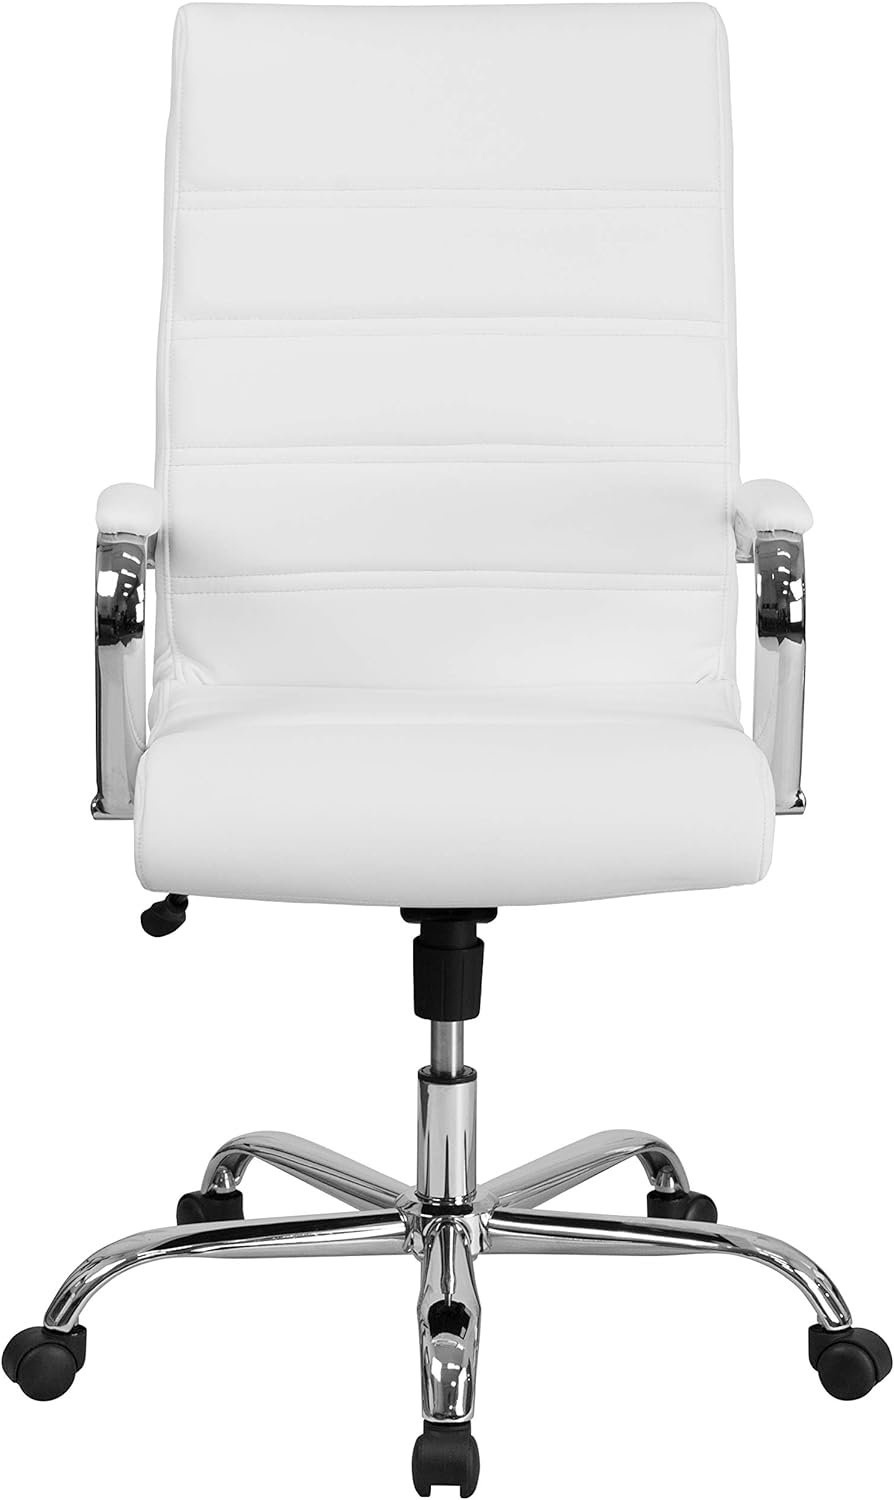 Flash Furniture Whitney High-Back Swivel LeatherSoft Desk Chair with Padded Seat and Armrests, Adjustable Height Padded Office Chair, White/Chrome